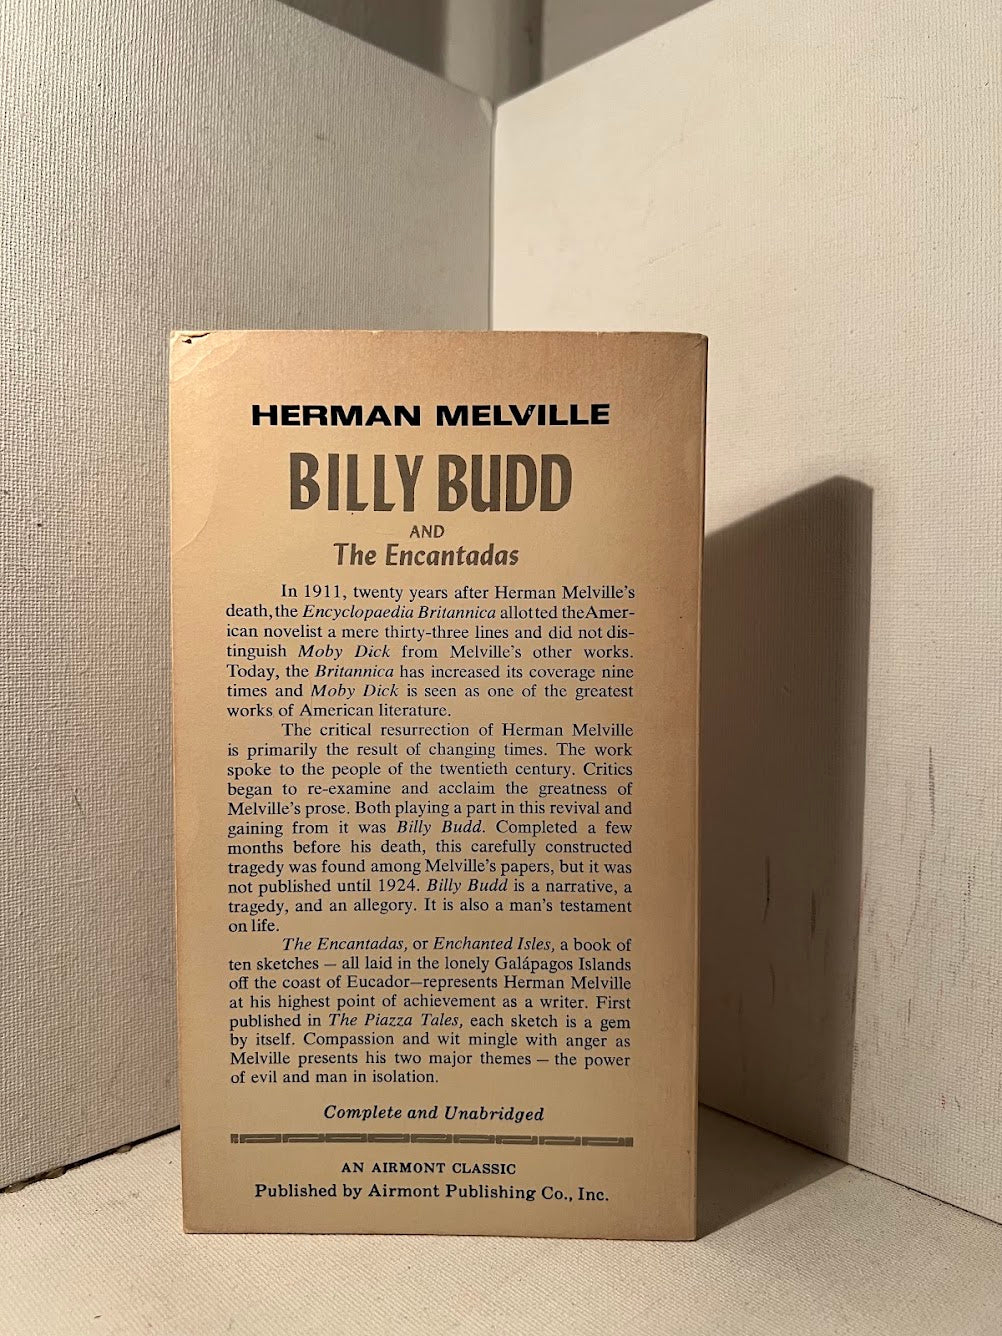 Billy Budd and The Encantadas by Herman Melville